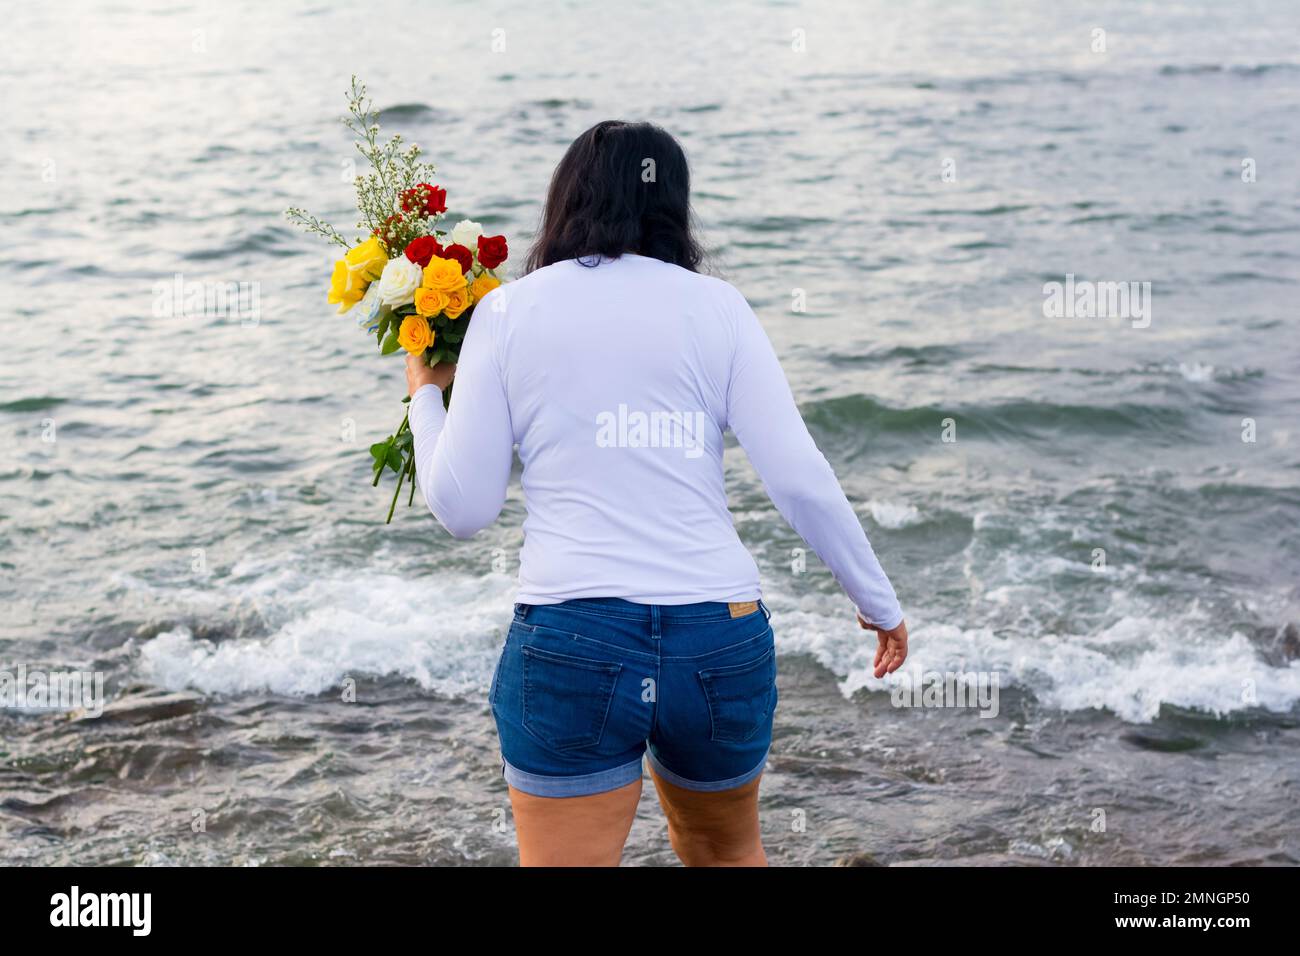 Salvador, Bahia, Brazil - February 02, 2017: Faithful Candomble women deliver flowers to the sea on the day of the feast in honor of Iemanja. Salvador Stock Photo